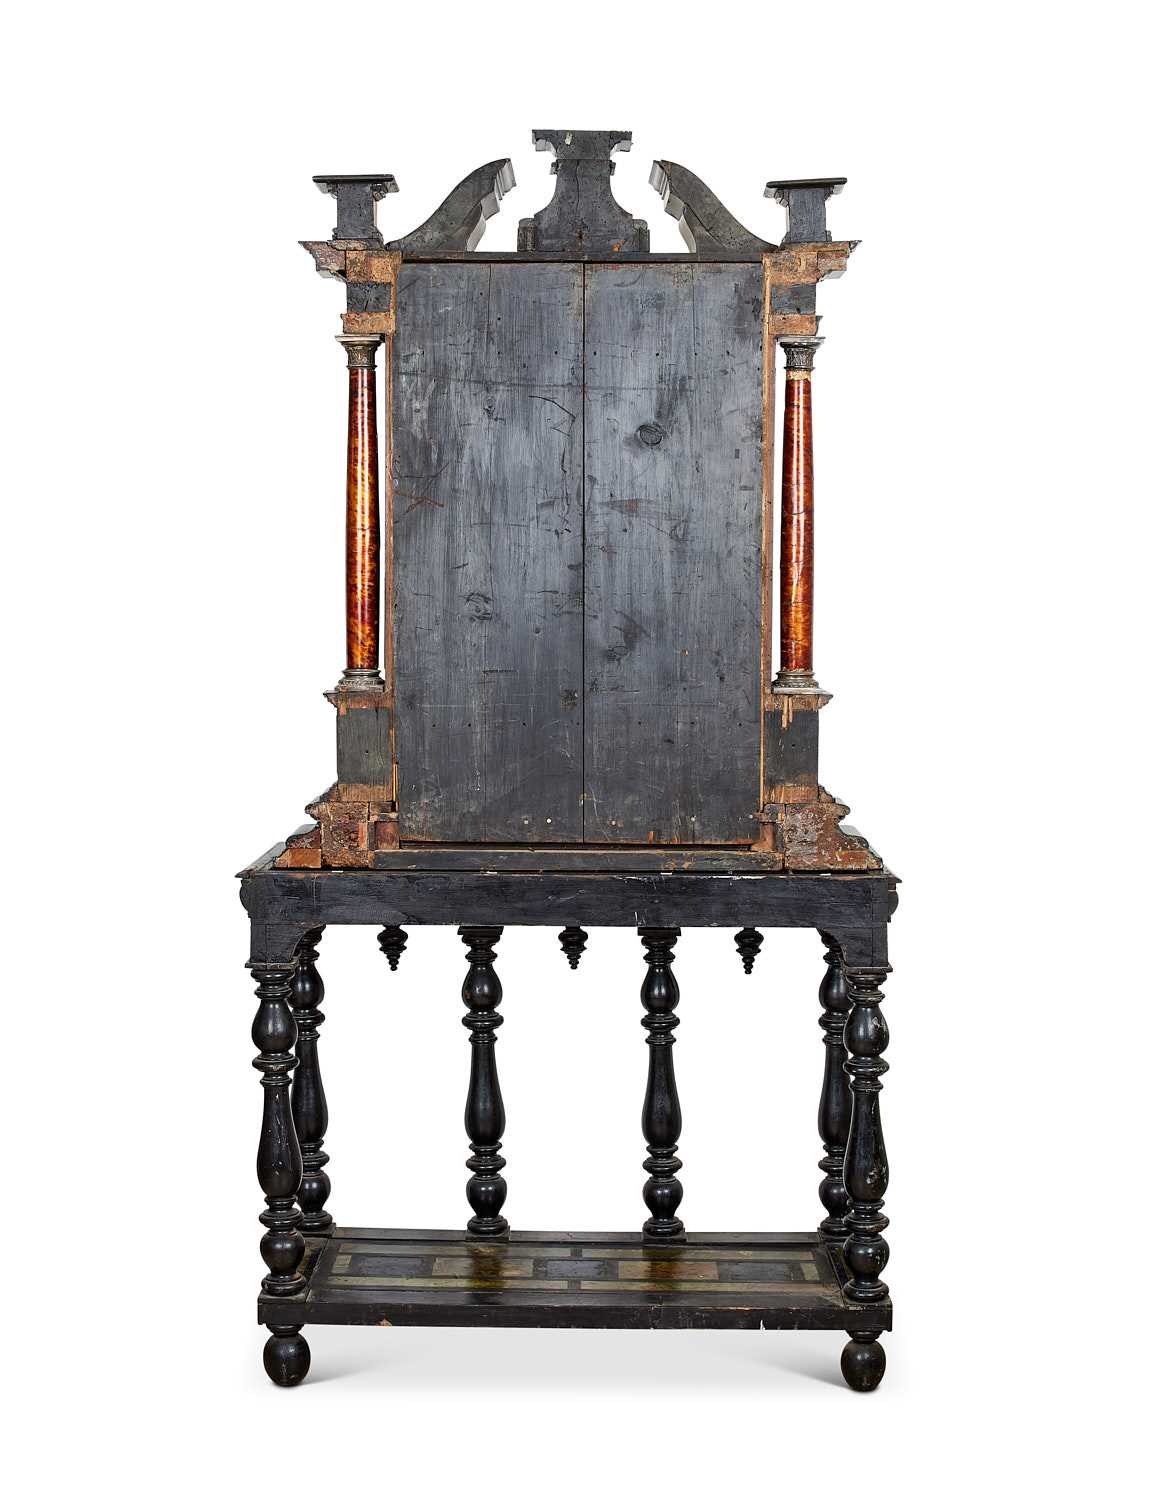 A LATE 17TH / EARLY 18TH CENTURY ITALIAN BAROQUE TORTOISESHELL CABINET ON LATER STAND - Image 2 of 10